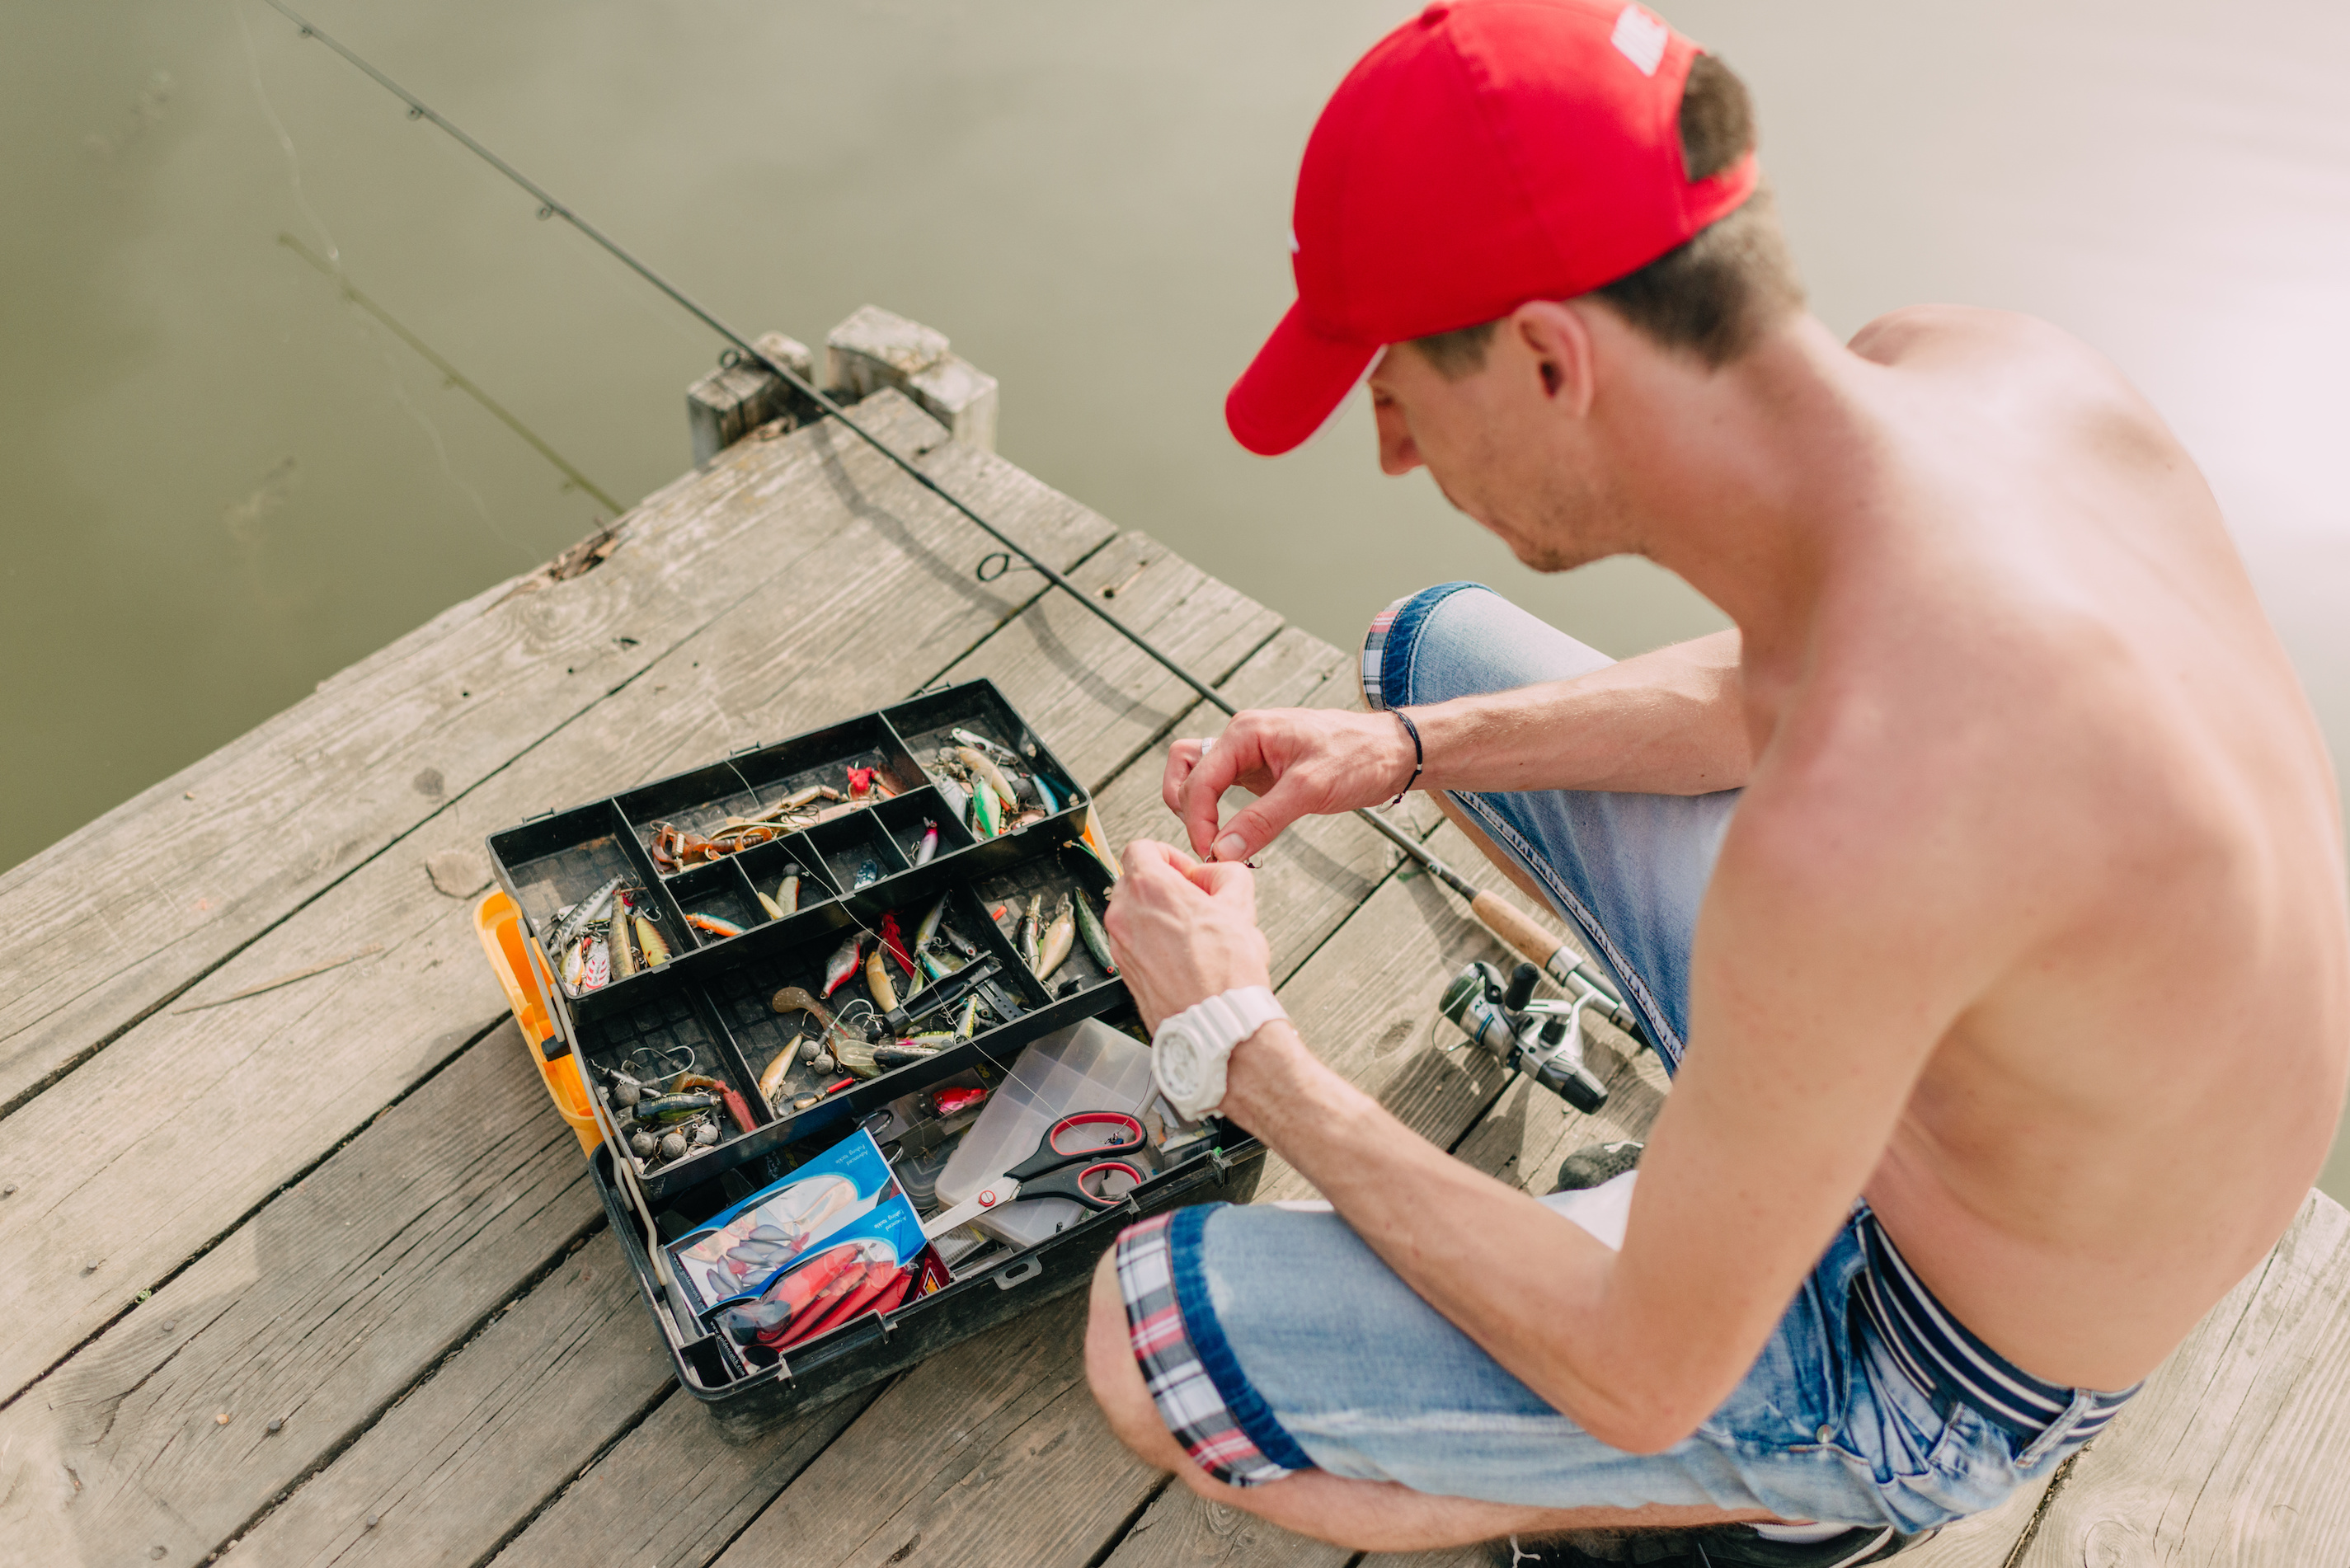 Best Fishing Box Monthly Subscription Services - Is it Worth It?